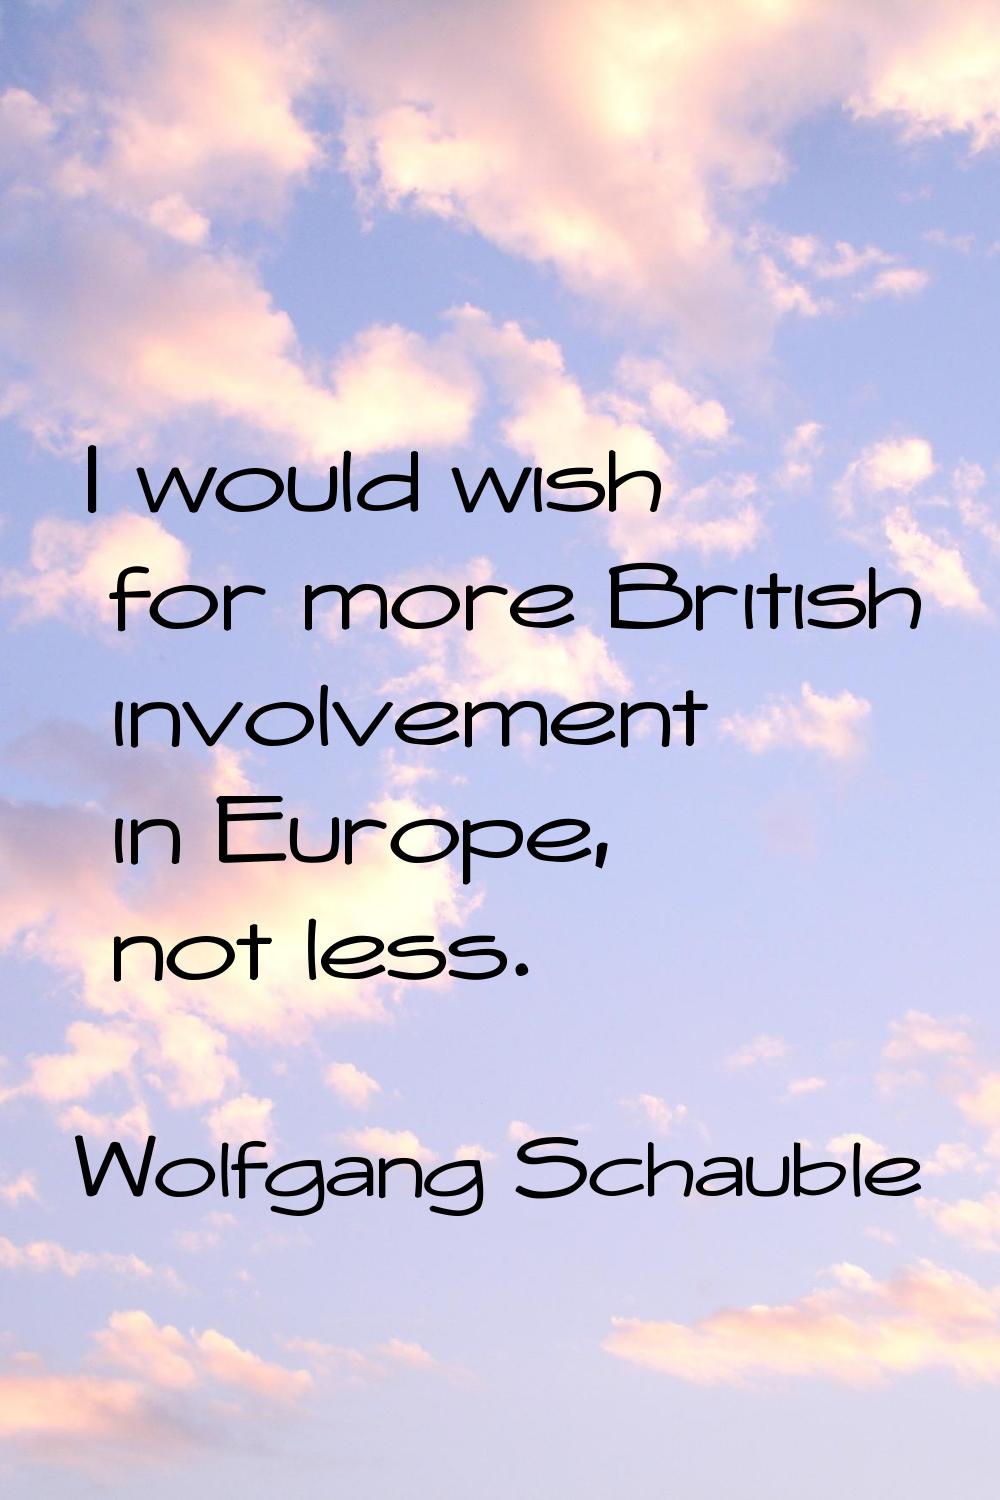 I would wish for more British involvement in Europe, not less.